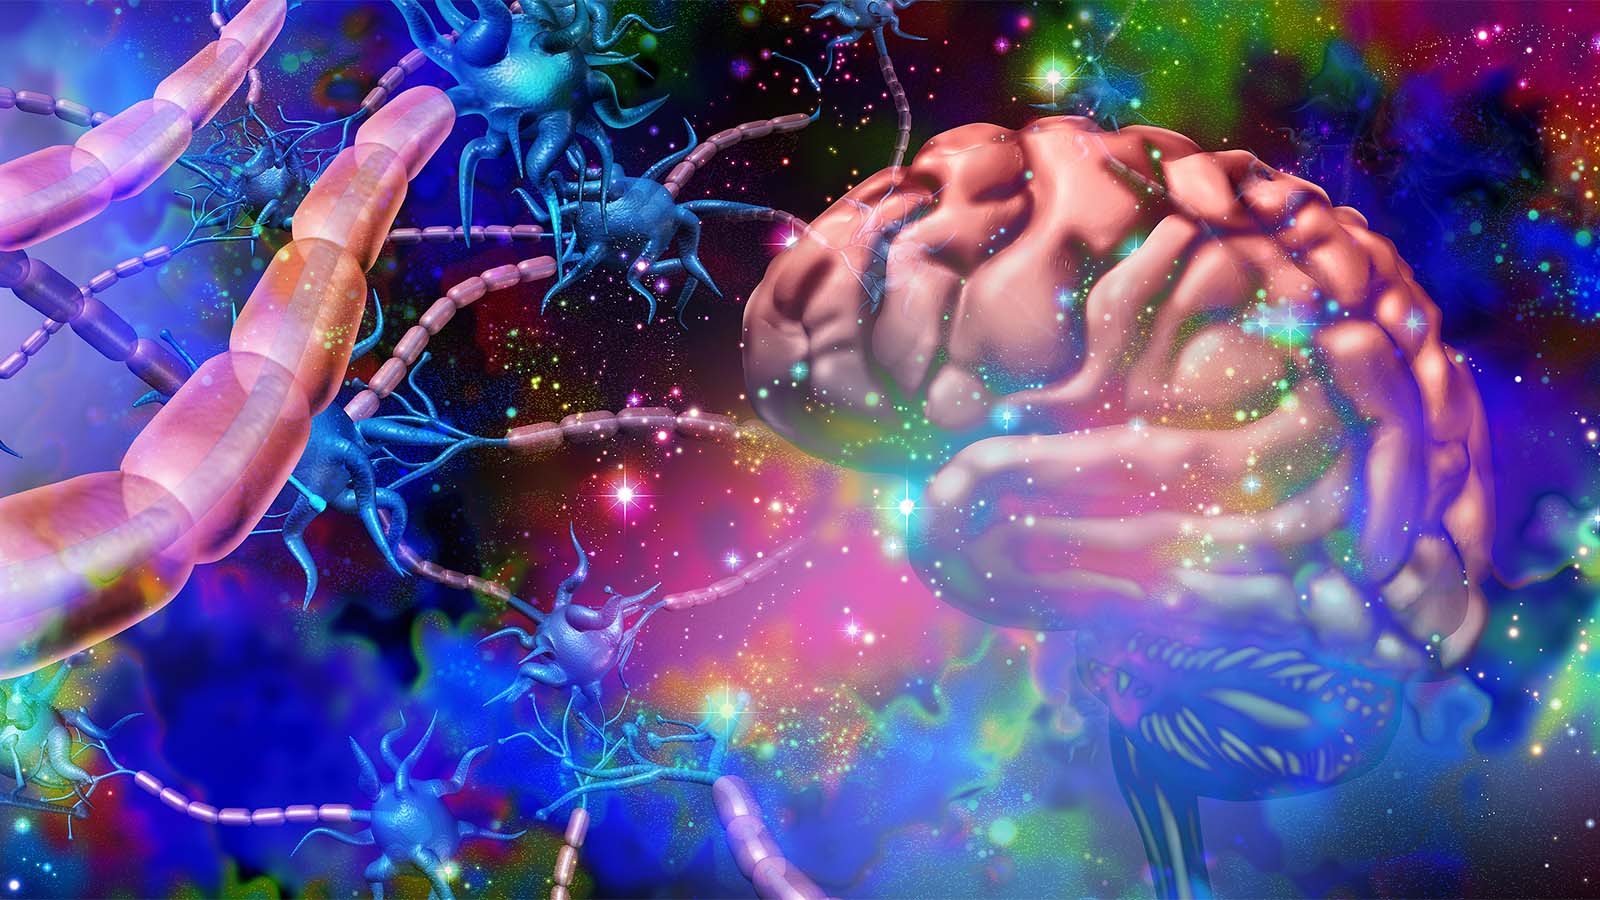 An image of brain and neurons abstractly rendered in very vibrant colors